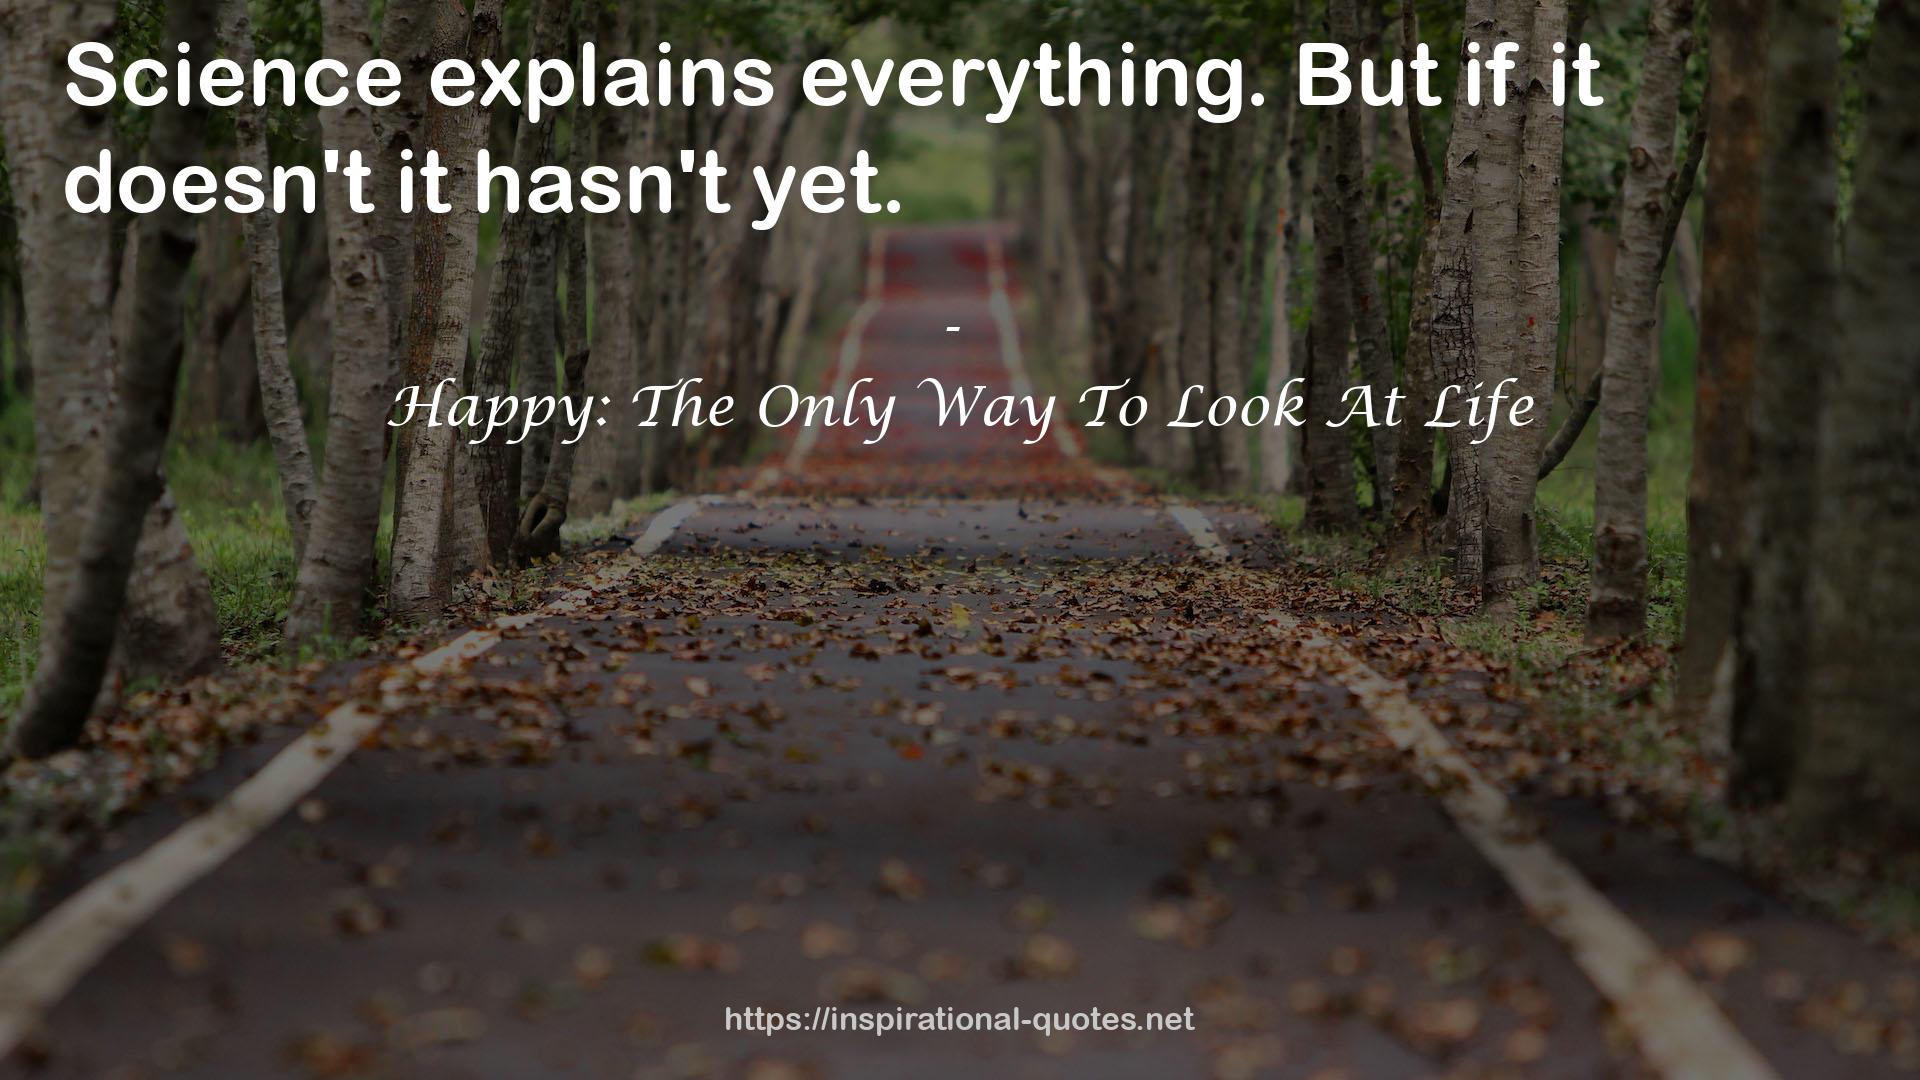 Happy: The Only Way To Look At Life QUOTES